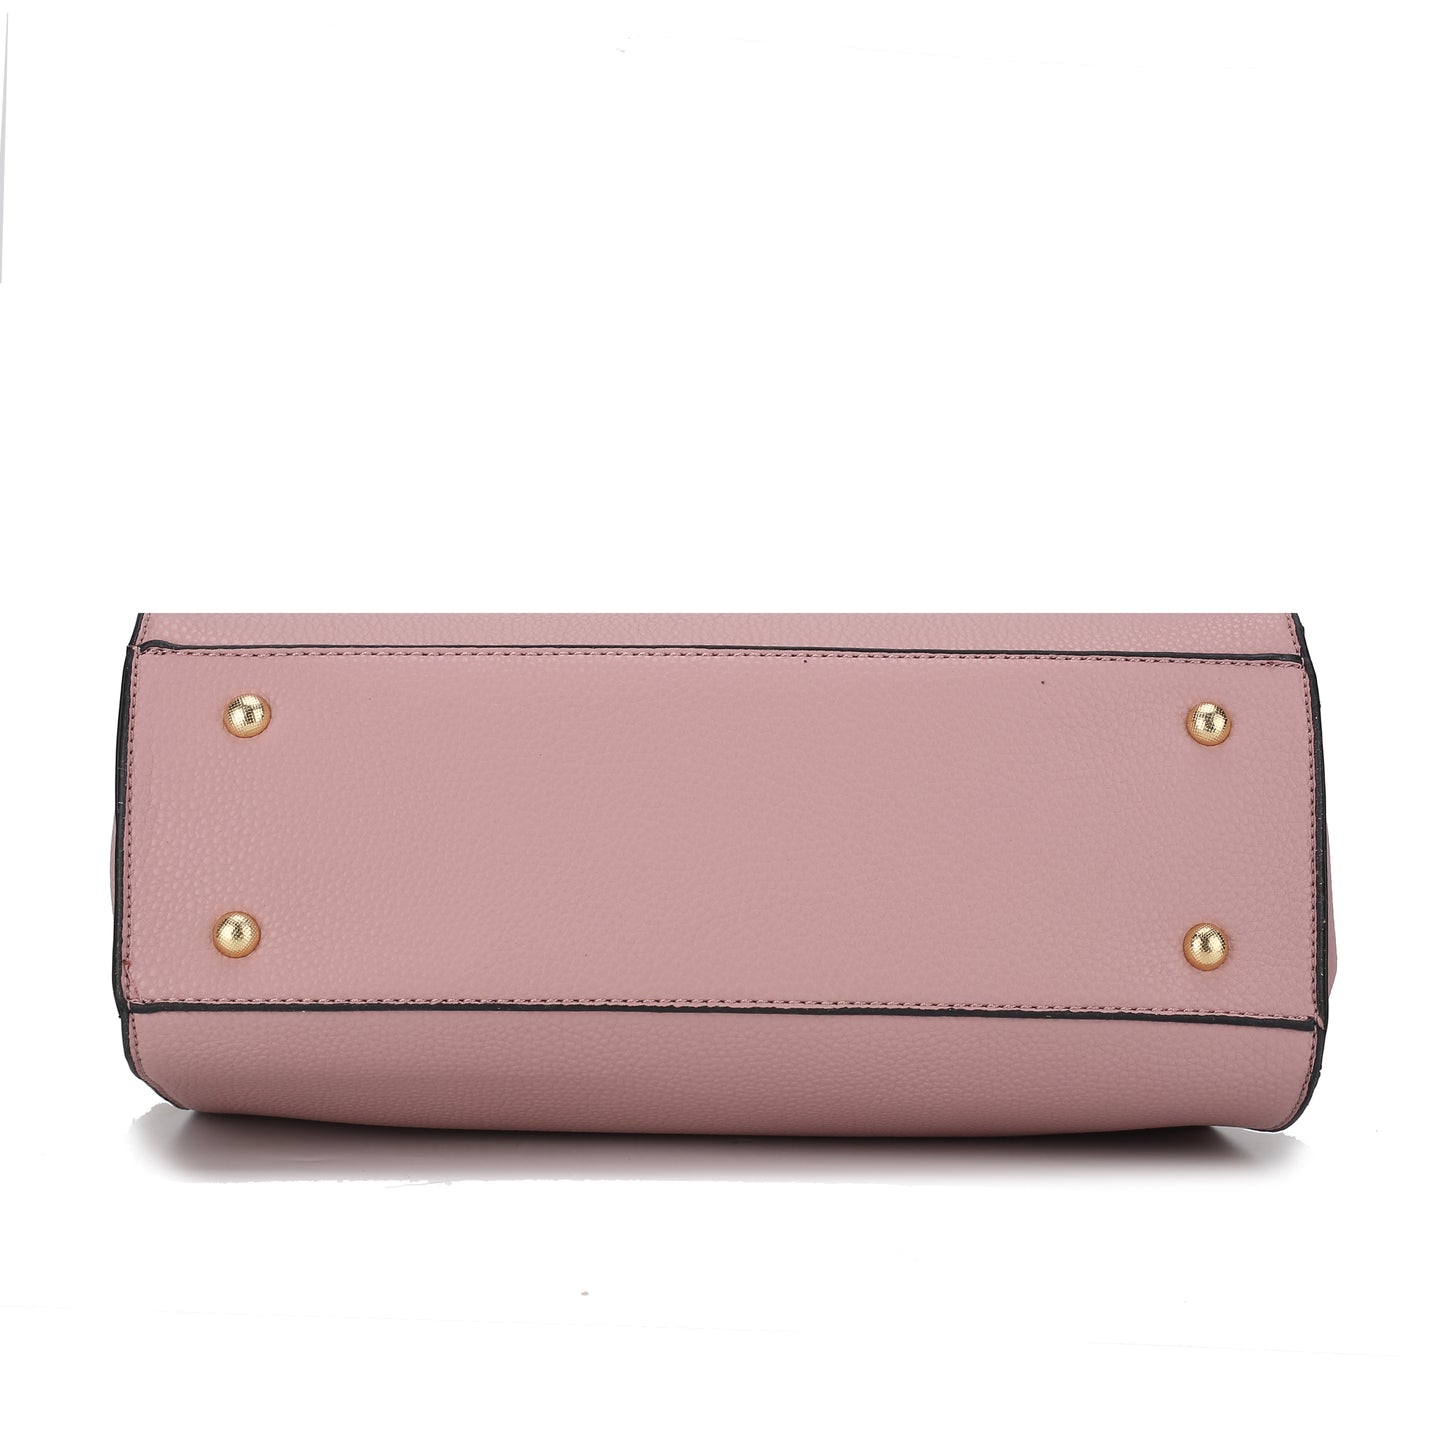 Pink Orpheus's Shelby Satchel Handbag with Wallet - A pink vegan leather handbag with gold hardware.